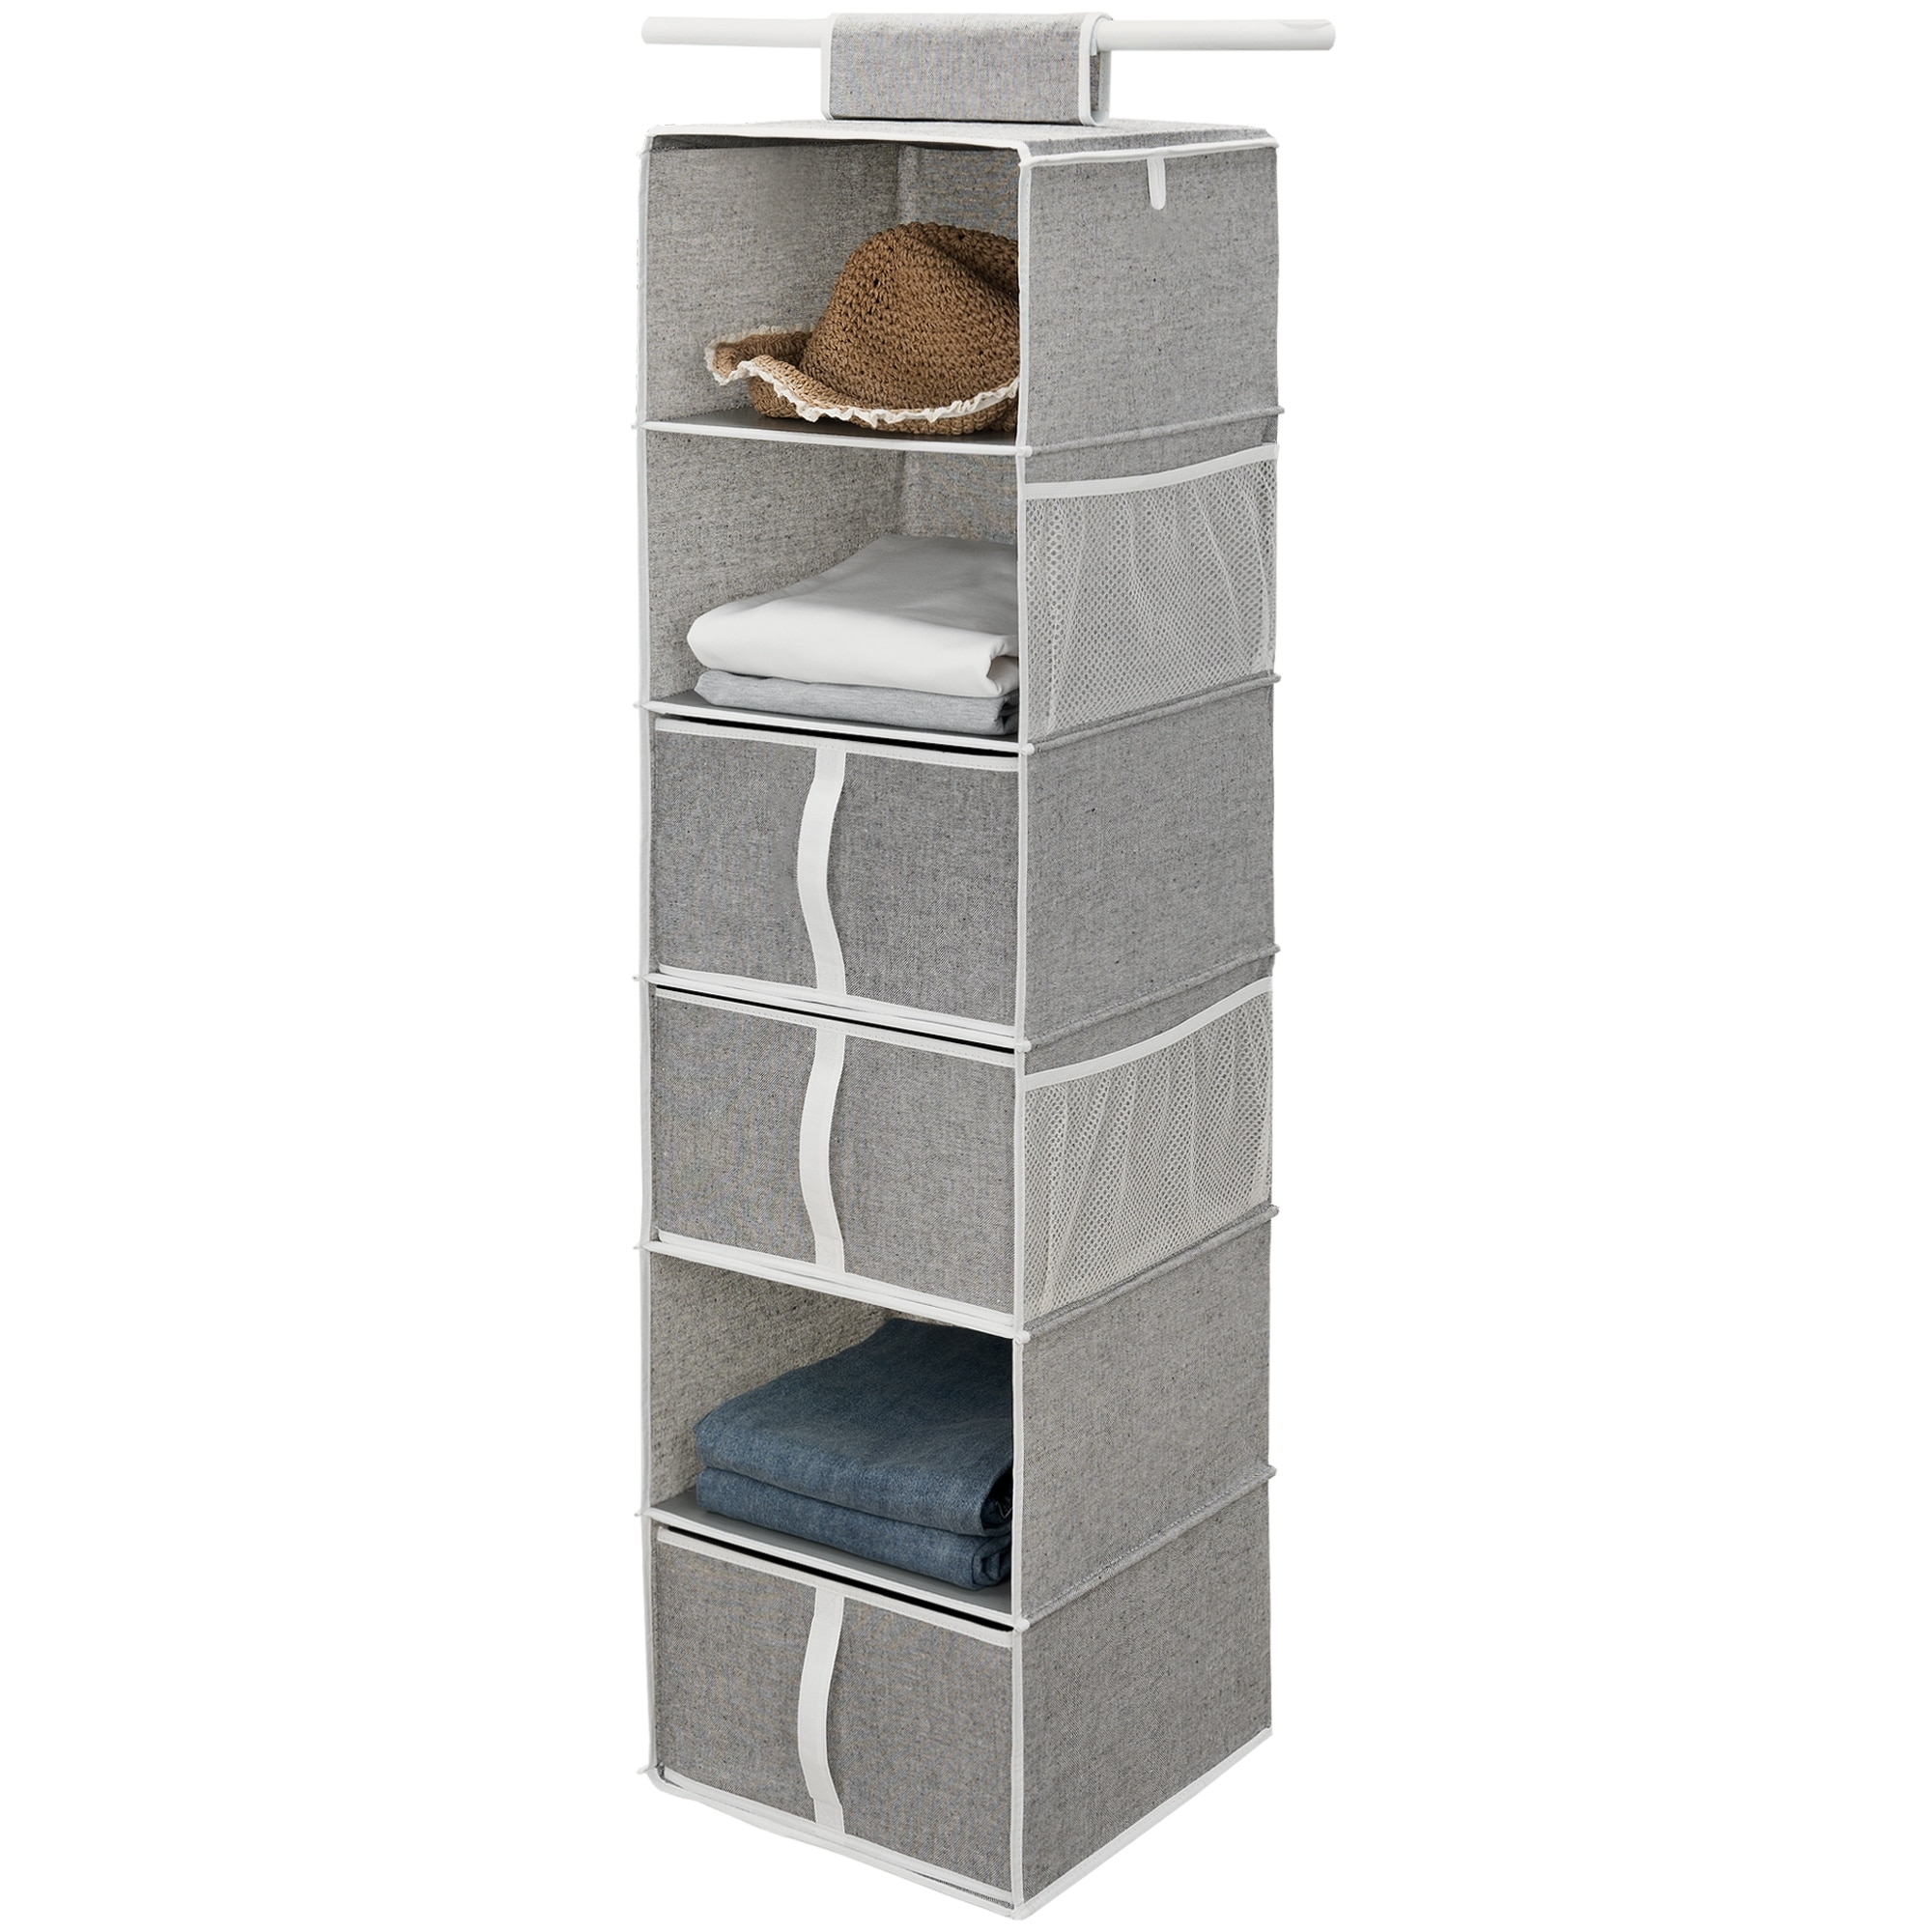 https://ak1.ostkcdn.com/images/products/is/images/direct/68704adc617eec5916637b36b5db12aa8c7e6f6f/StorageWorks-6-Tiers-Hanging-Organizer.jpg